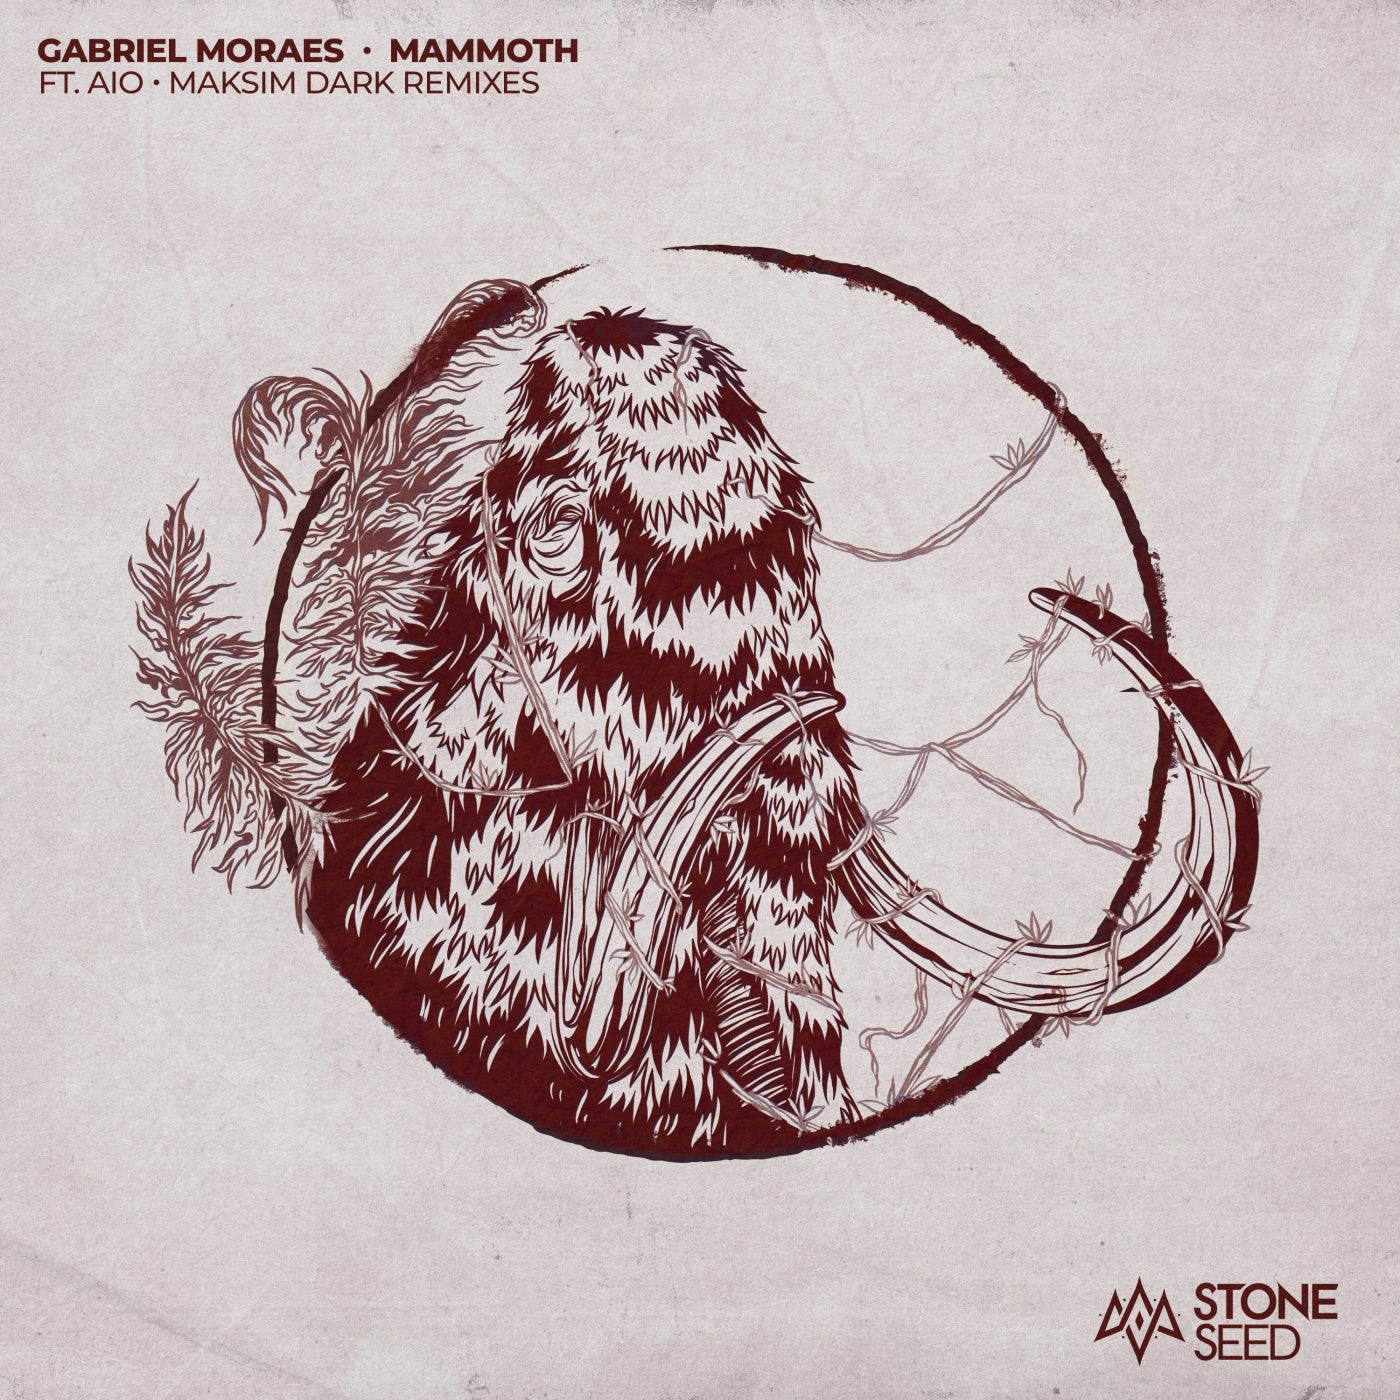 image cover: Gabriel Moraes - Mammoth on Stone Seed